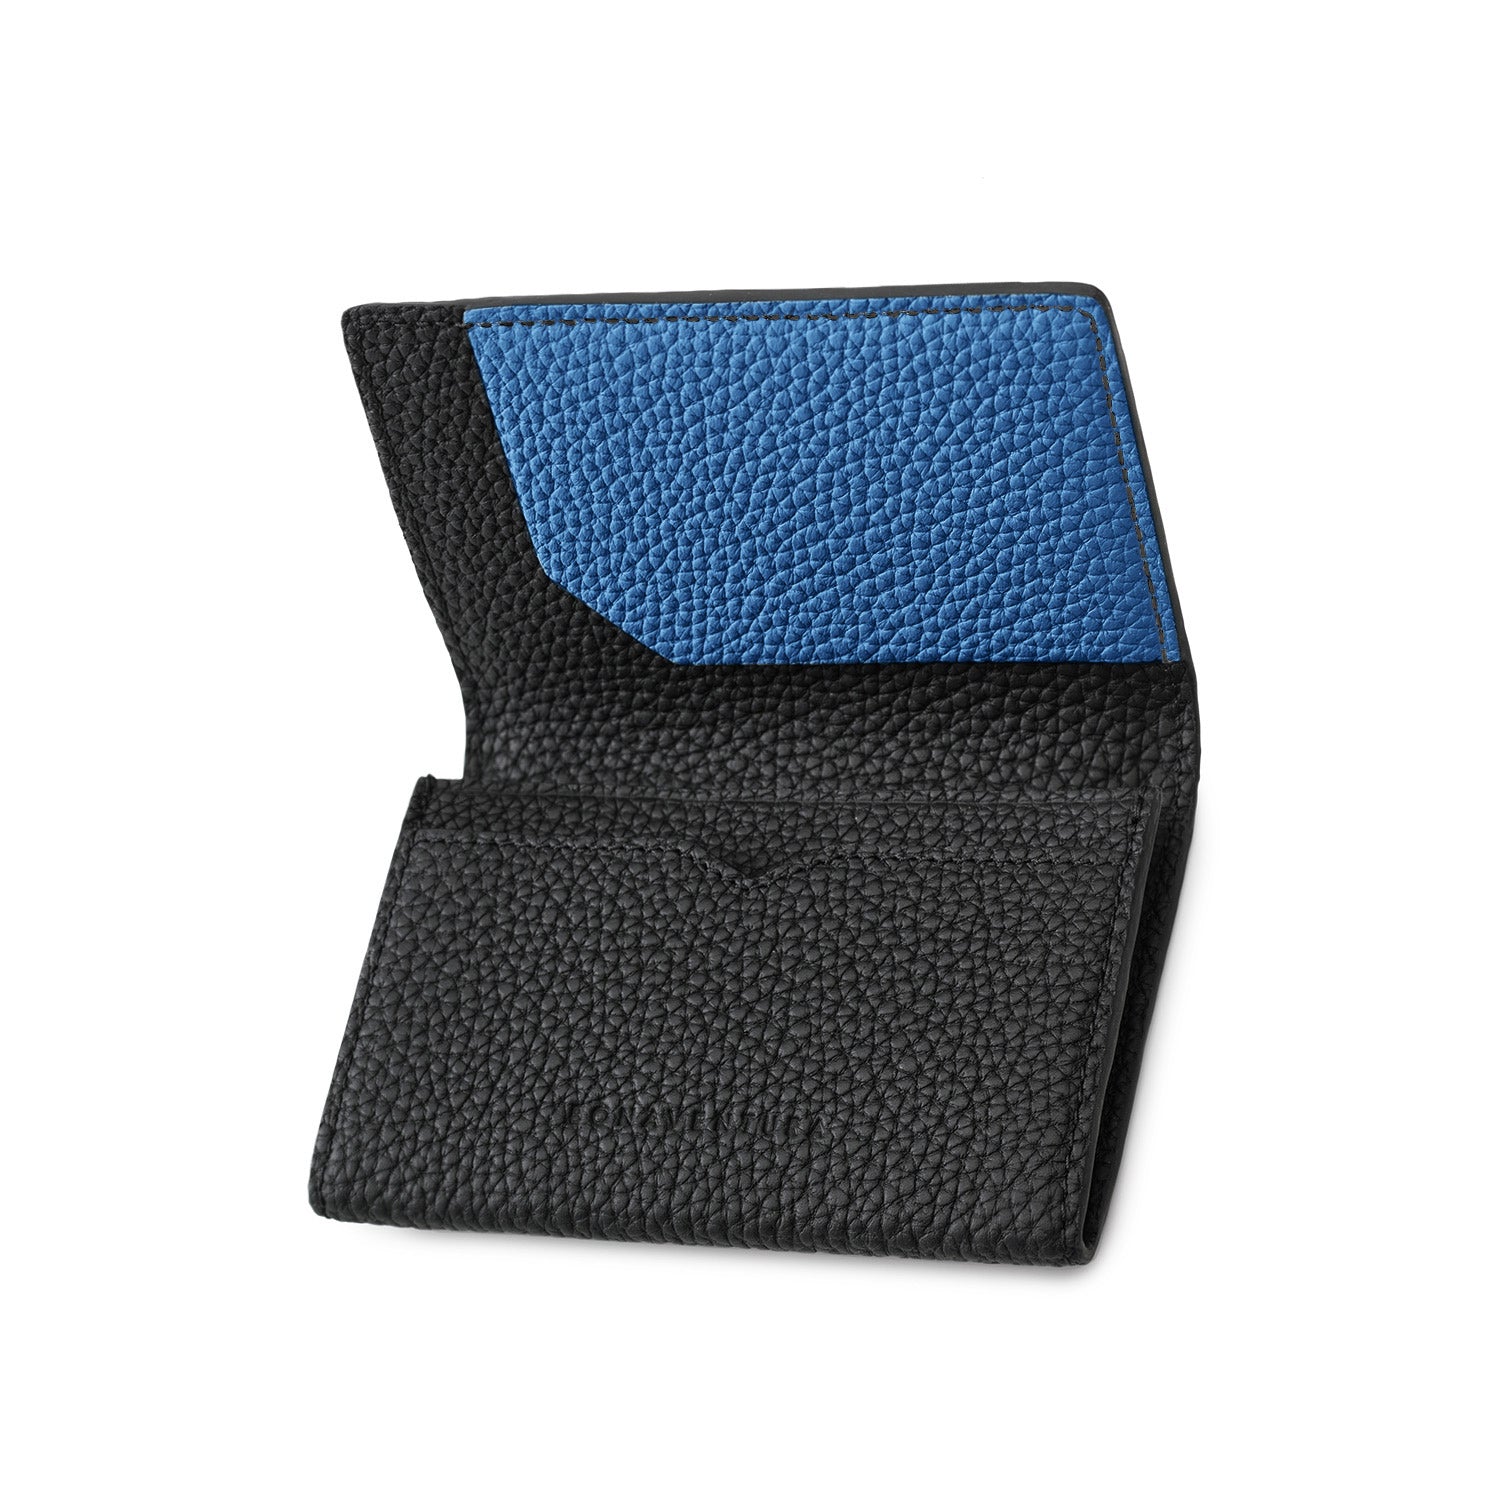 SAVOIA × BONAVENTURA Business card case with sleeve in shrink leather